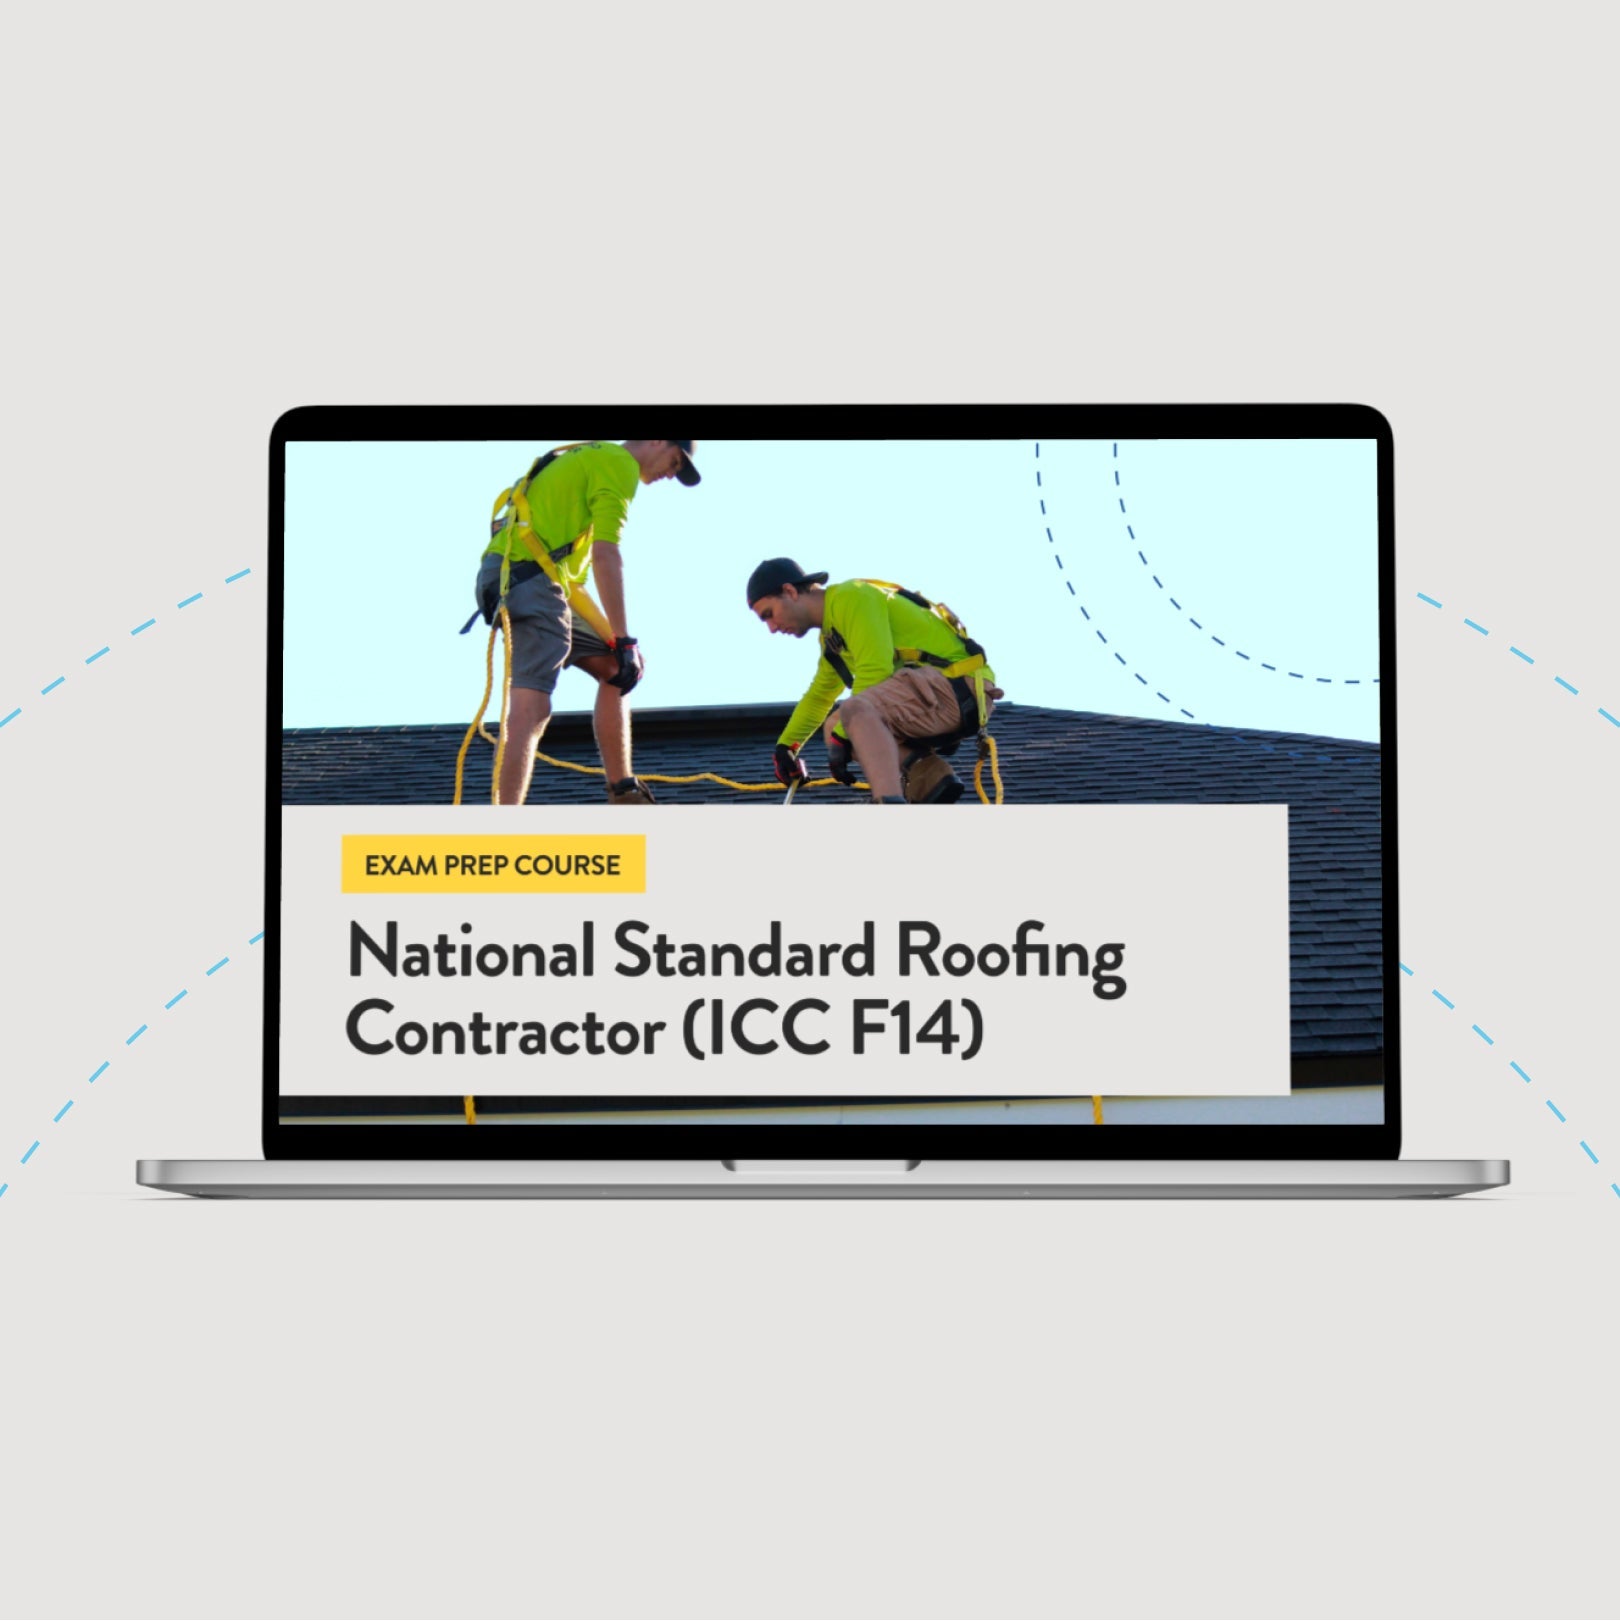 National Standard Roofing Contractor (ICC F14) Exam Prep Course